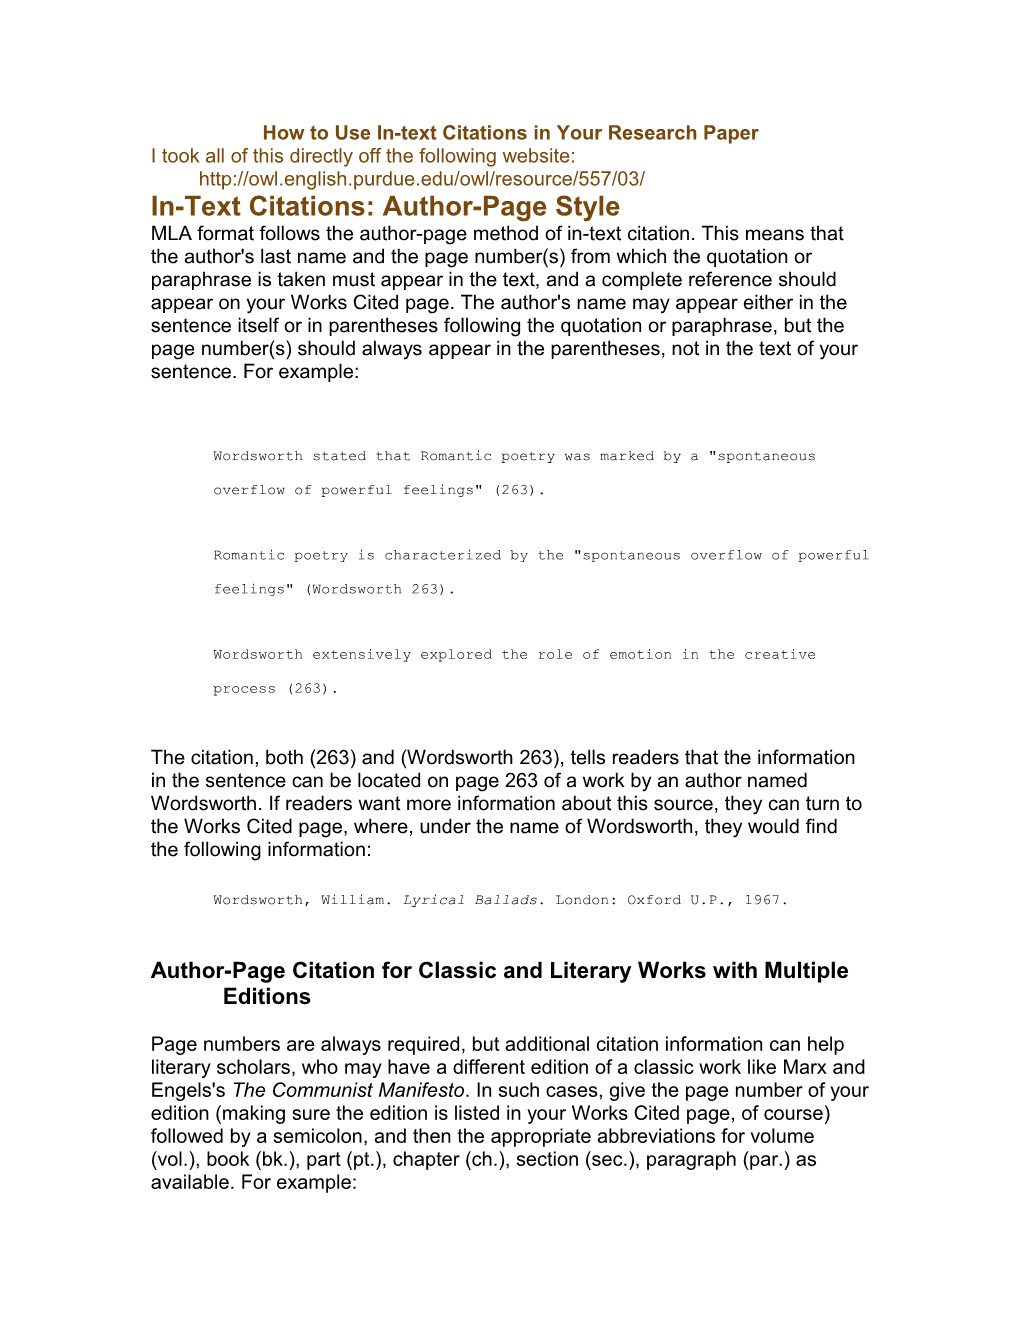 How To Use In-Text Citations In Your Research Paper